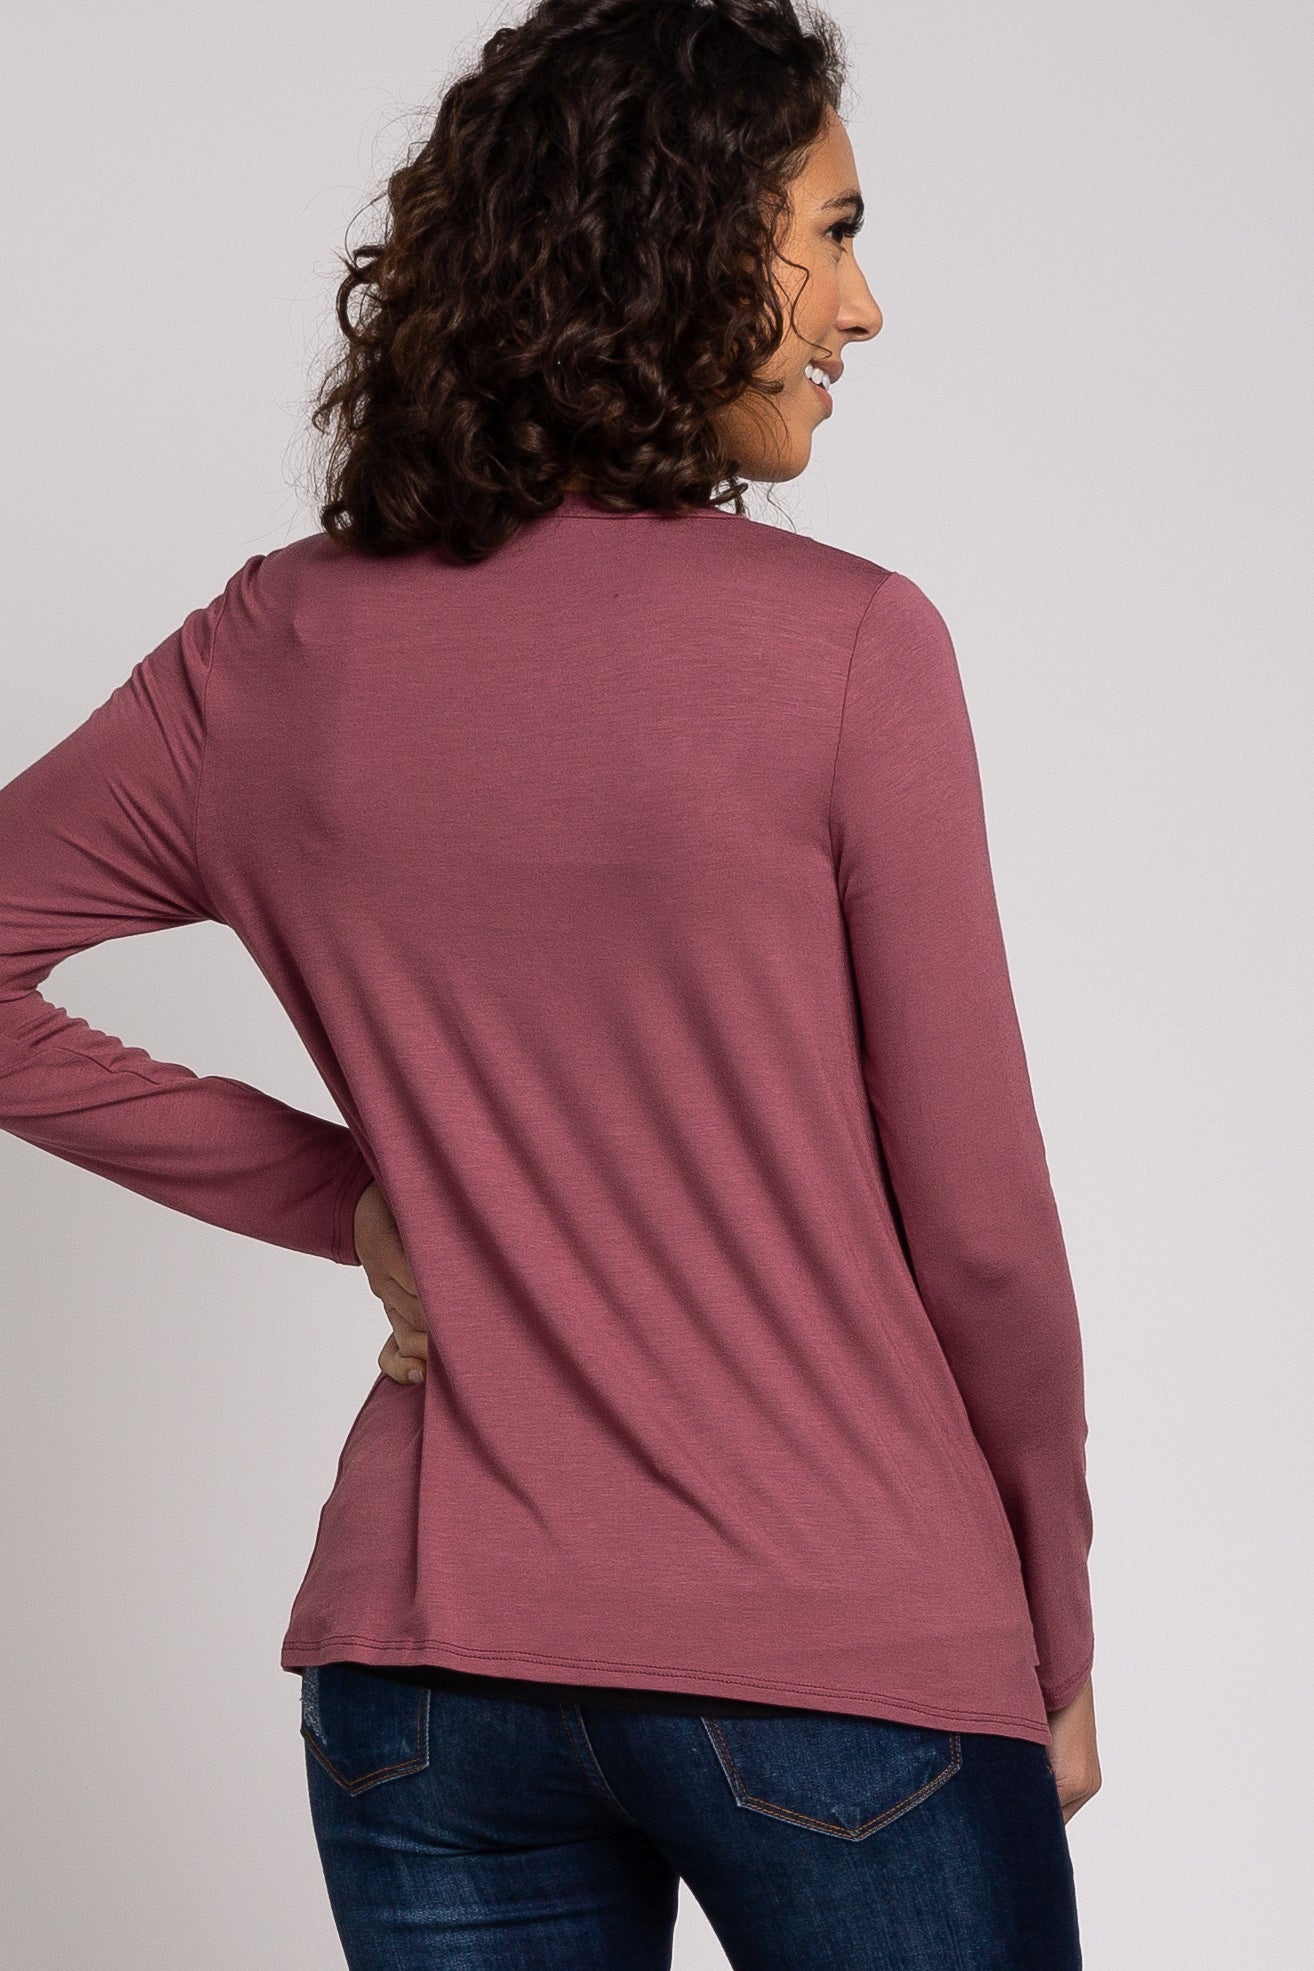 PinkBlush Mauve Solid Layered Front Long Sleeve Nursing Top